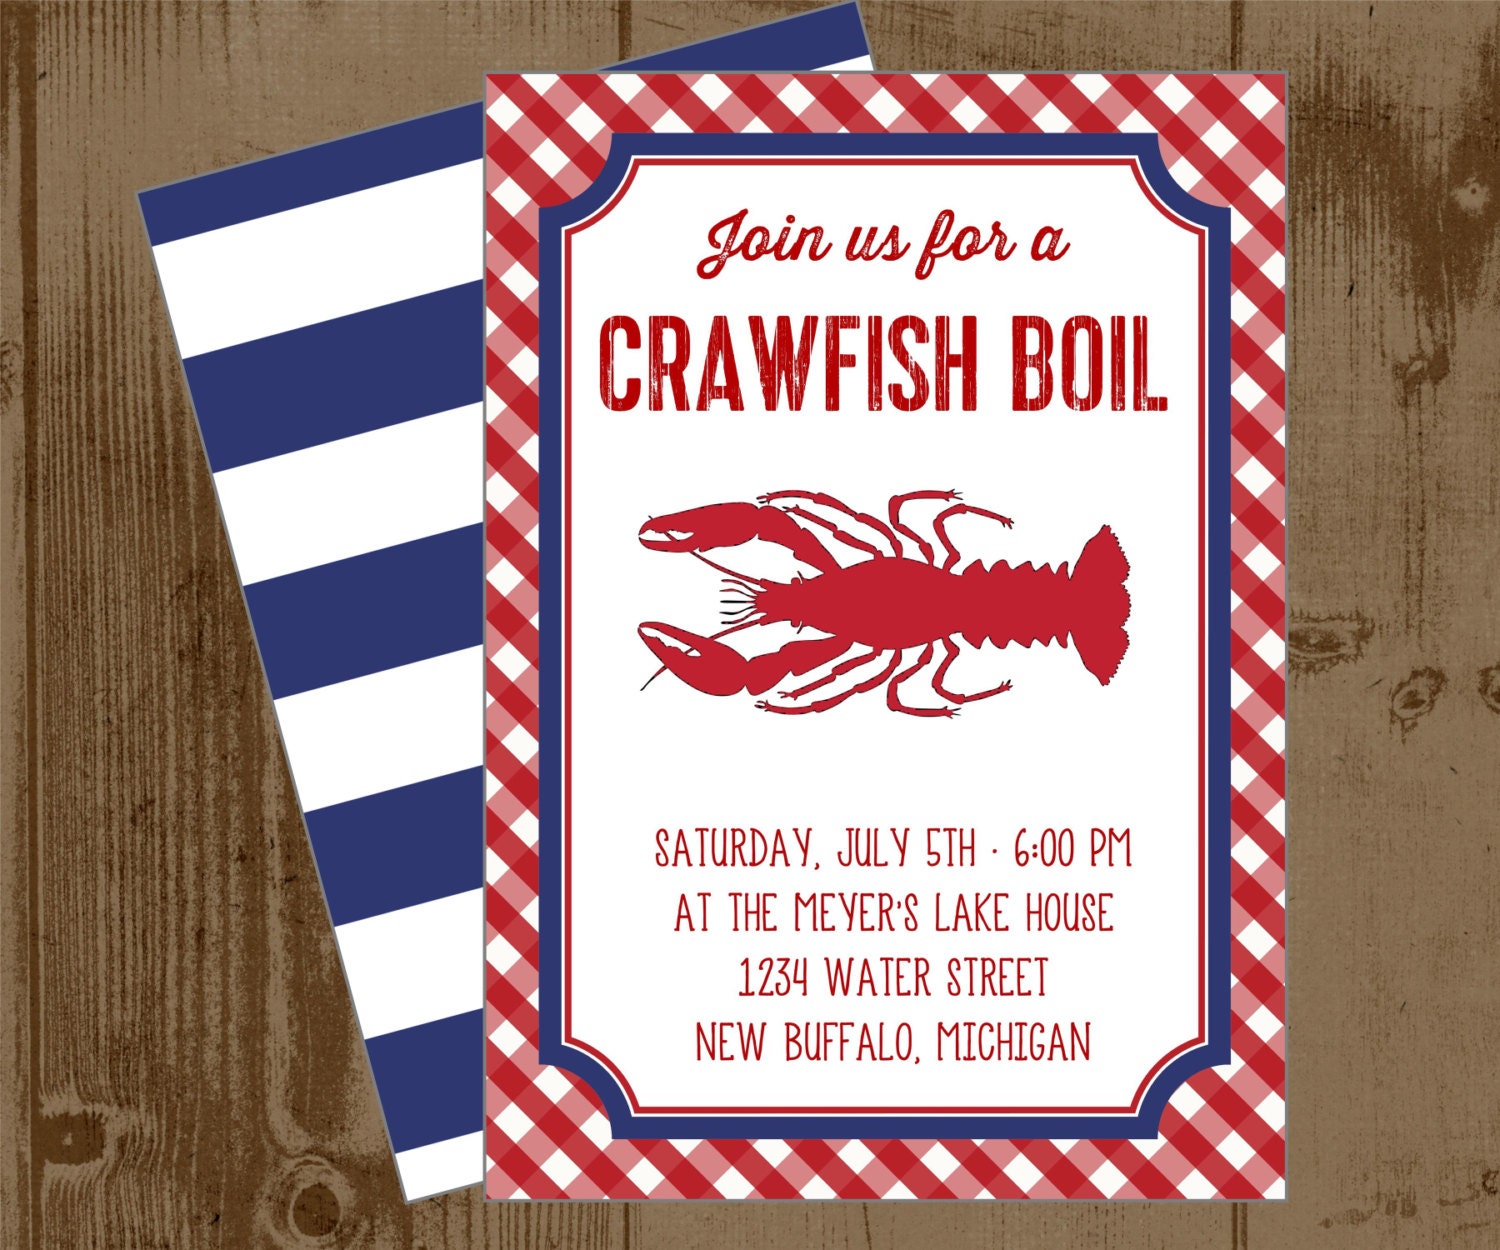 Crawfish Boil Printable Party Invitaiton - Red Gingham Blue Cabana Stripes Lakehouse Seafood Low Country